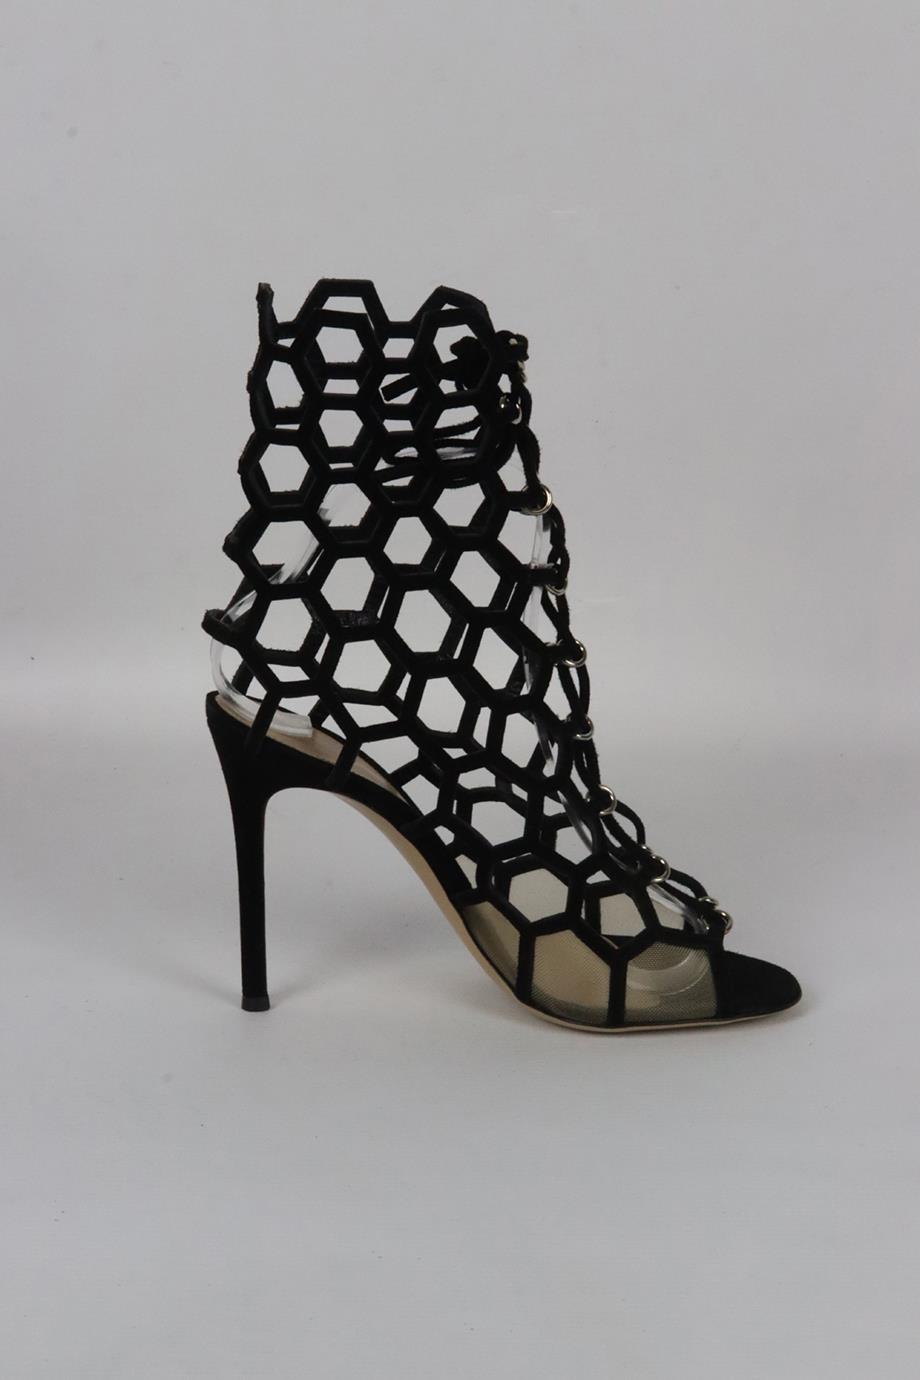 GIANVITO ROSSI CUTOUT SUEDE AND MESH ANKLE BOOTS EU 38 UK 5 US 8